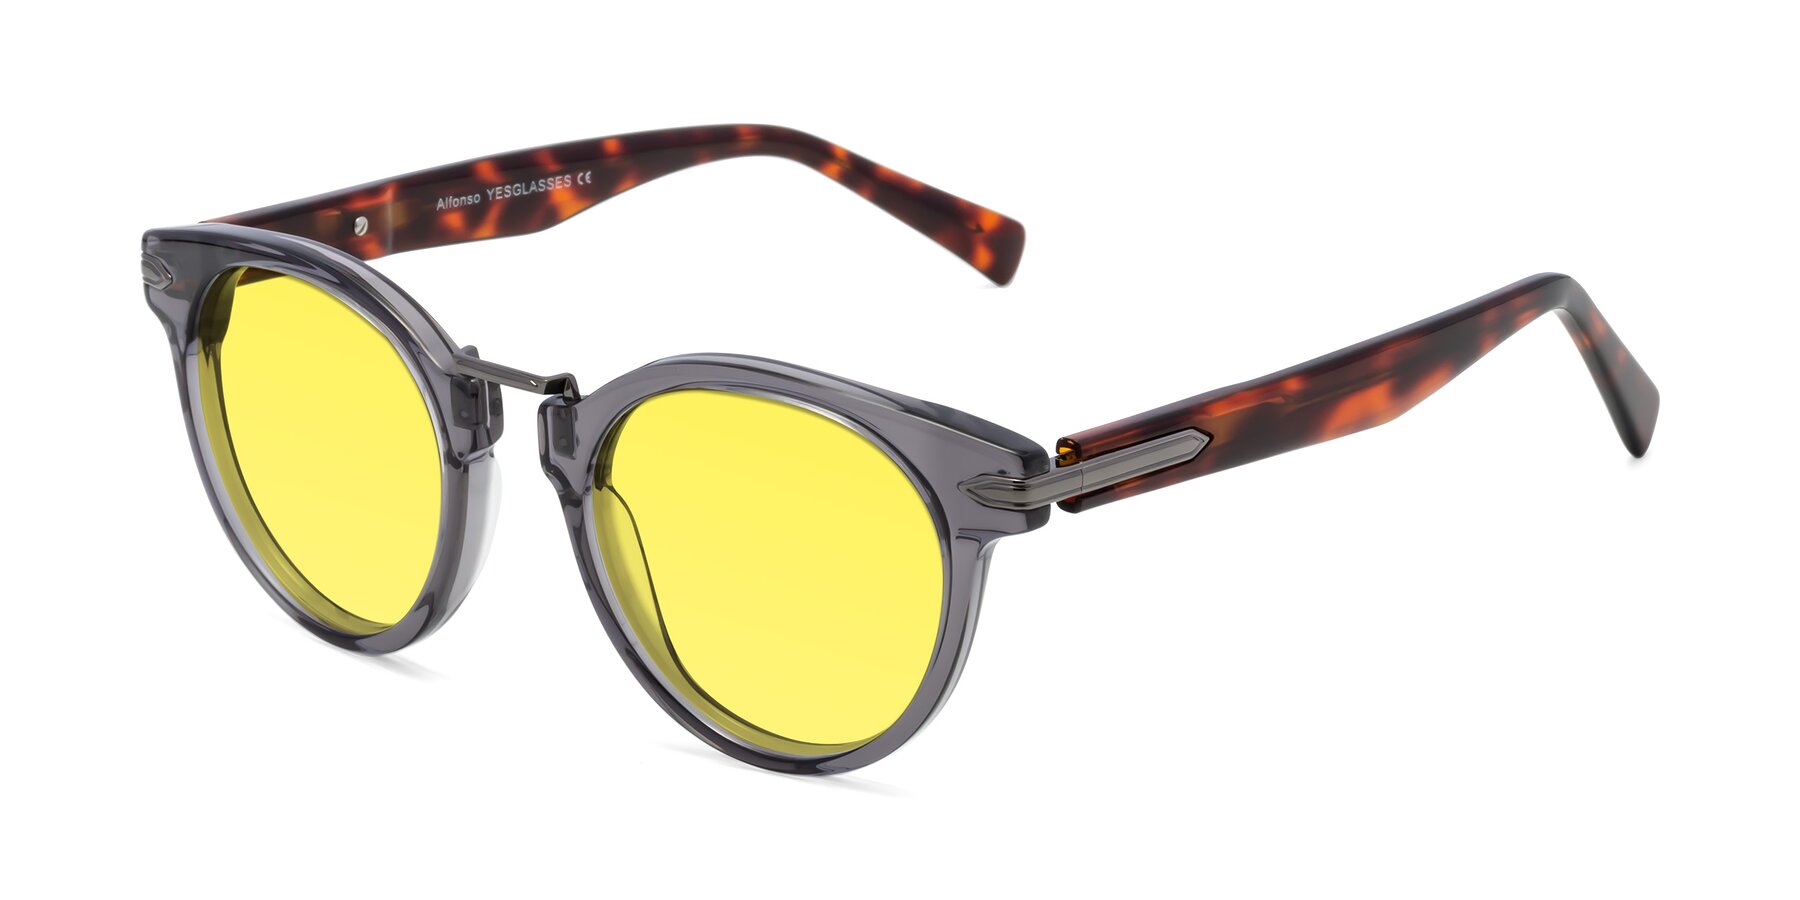 Angle of Alfonso in Gray /Tortoise with Medium Yellow Tinted Lenses